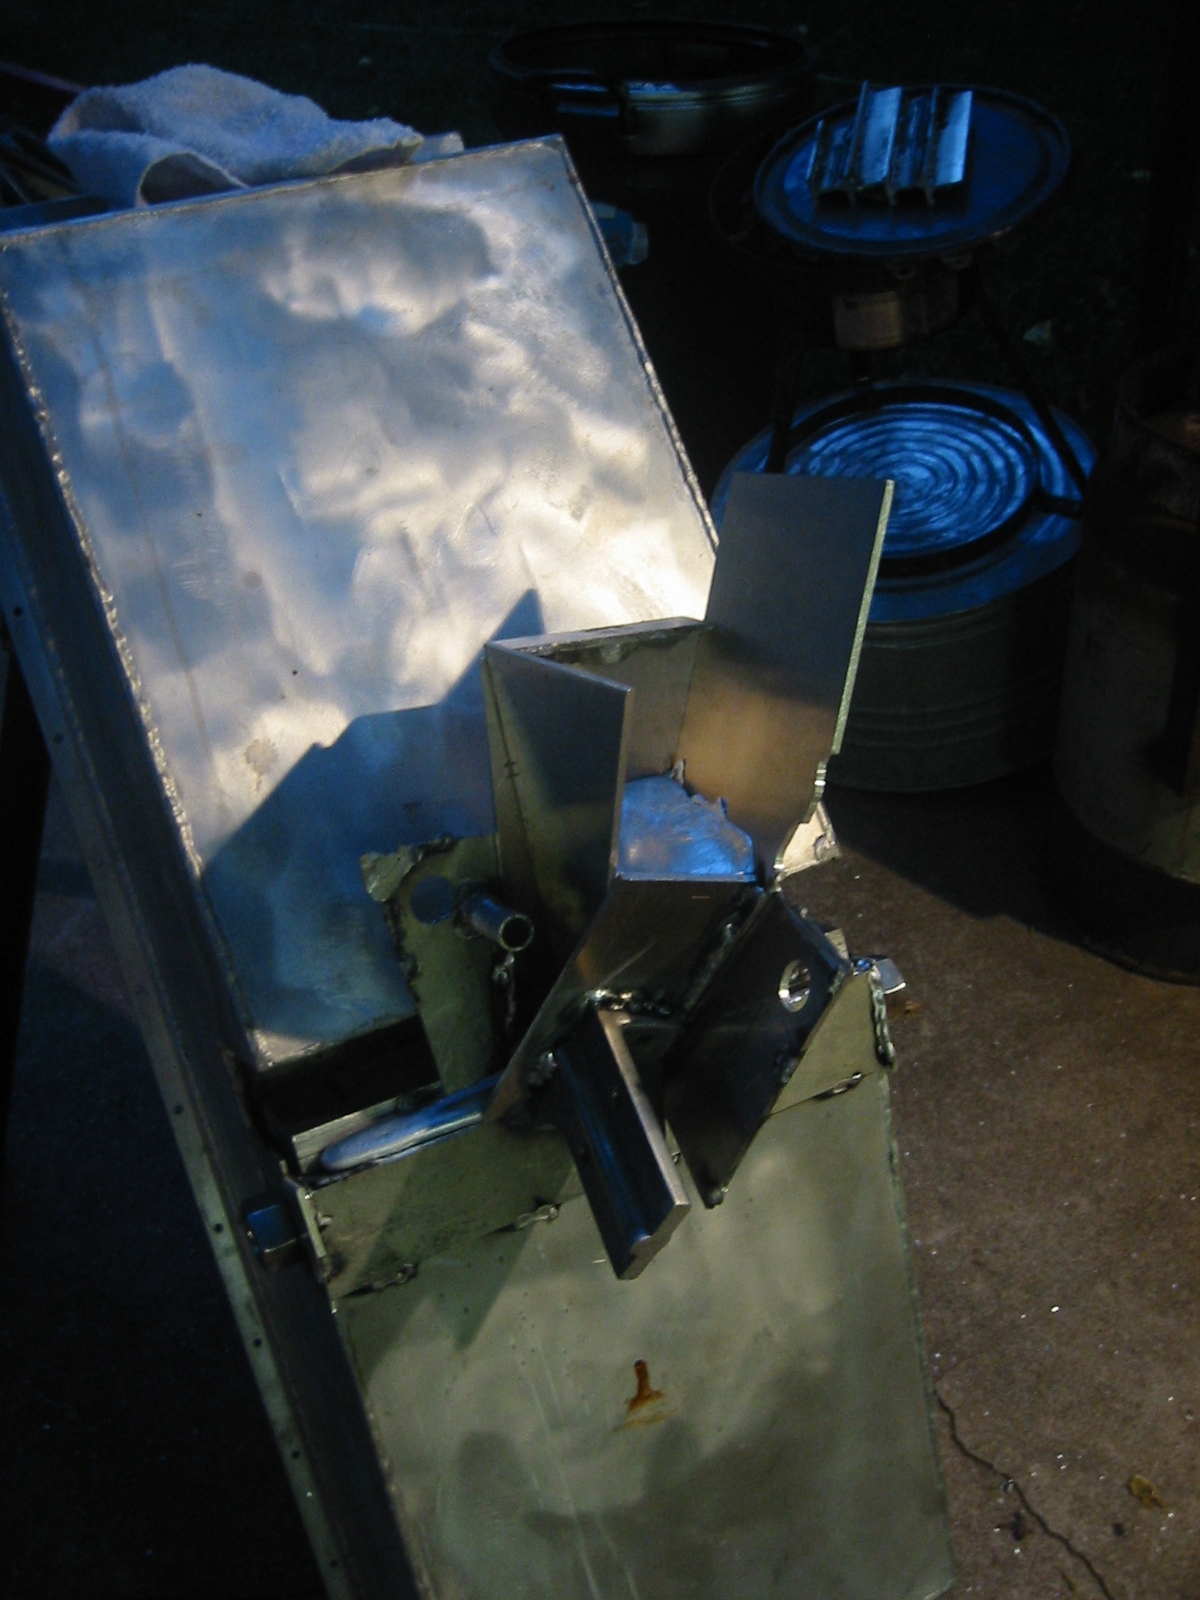 (4) Additional scrap was added as a heat sync for the funnel.